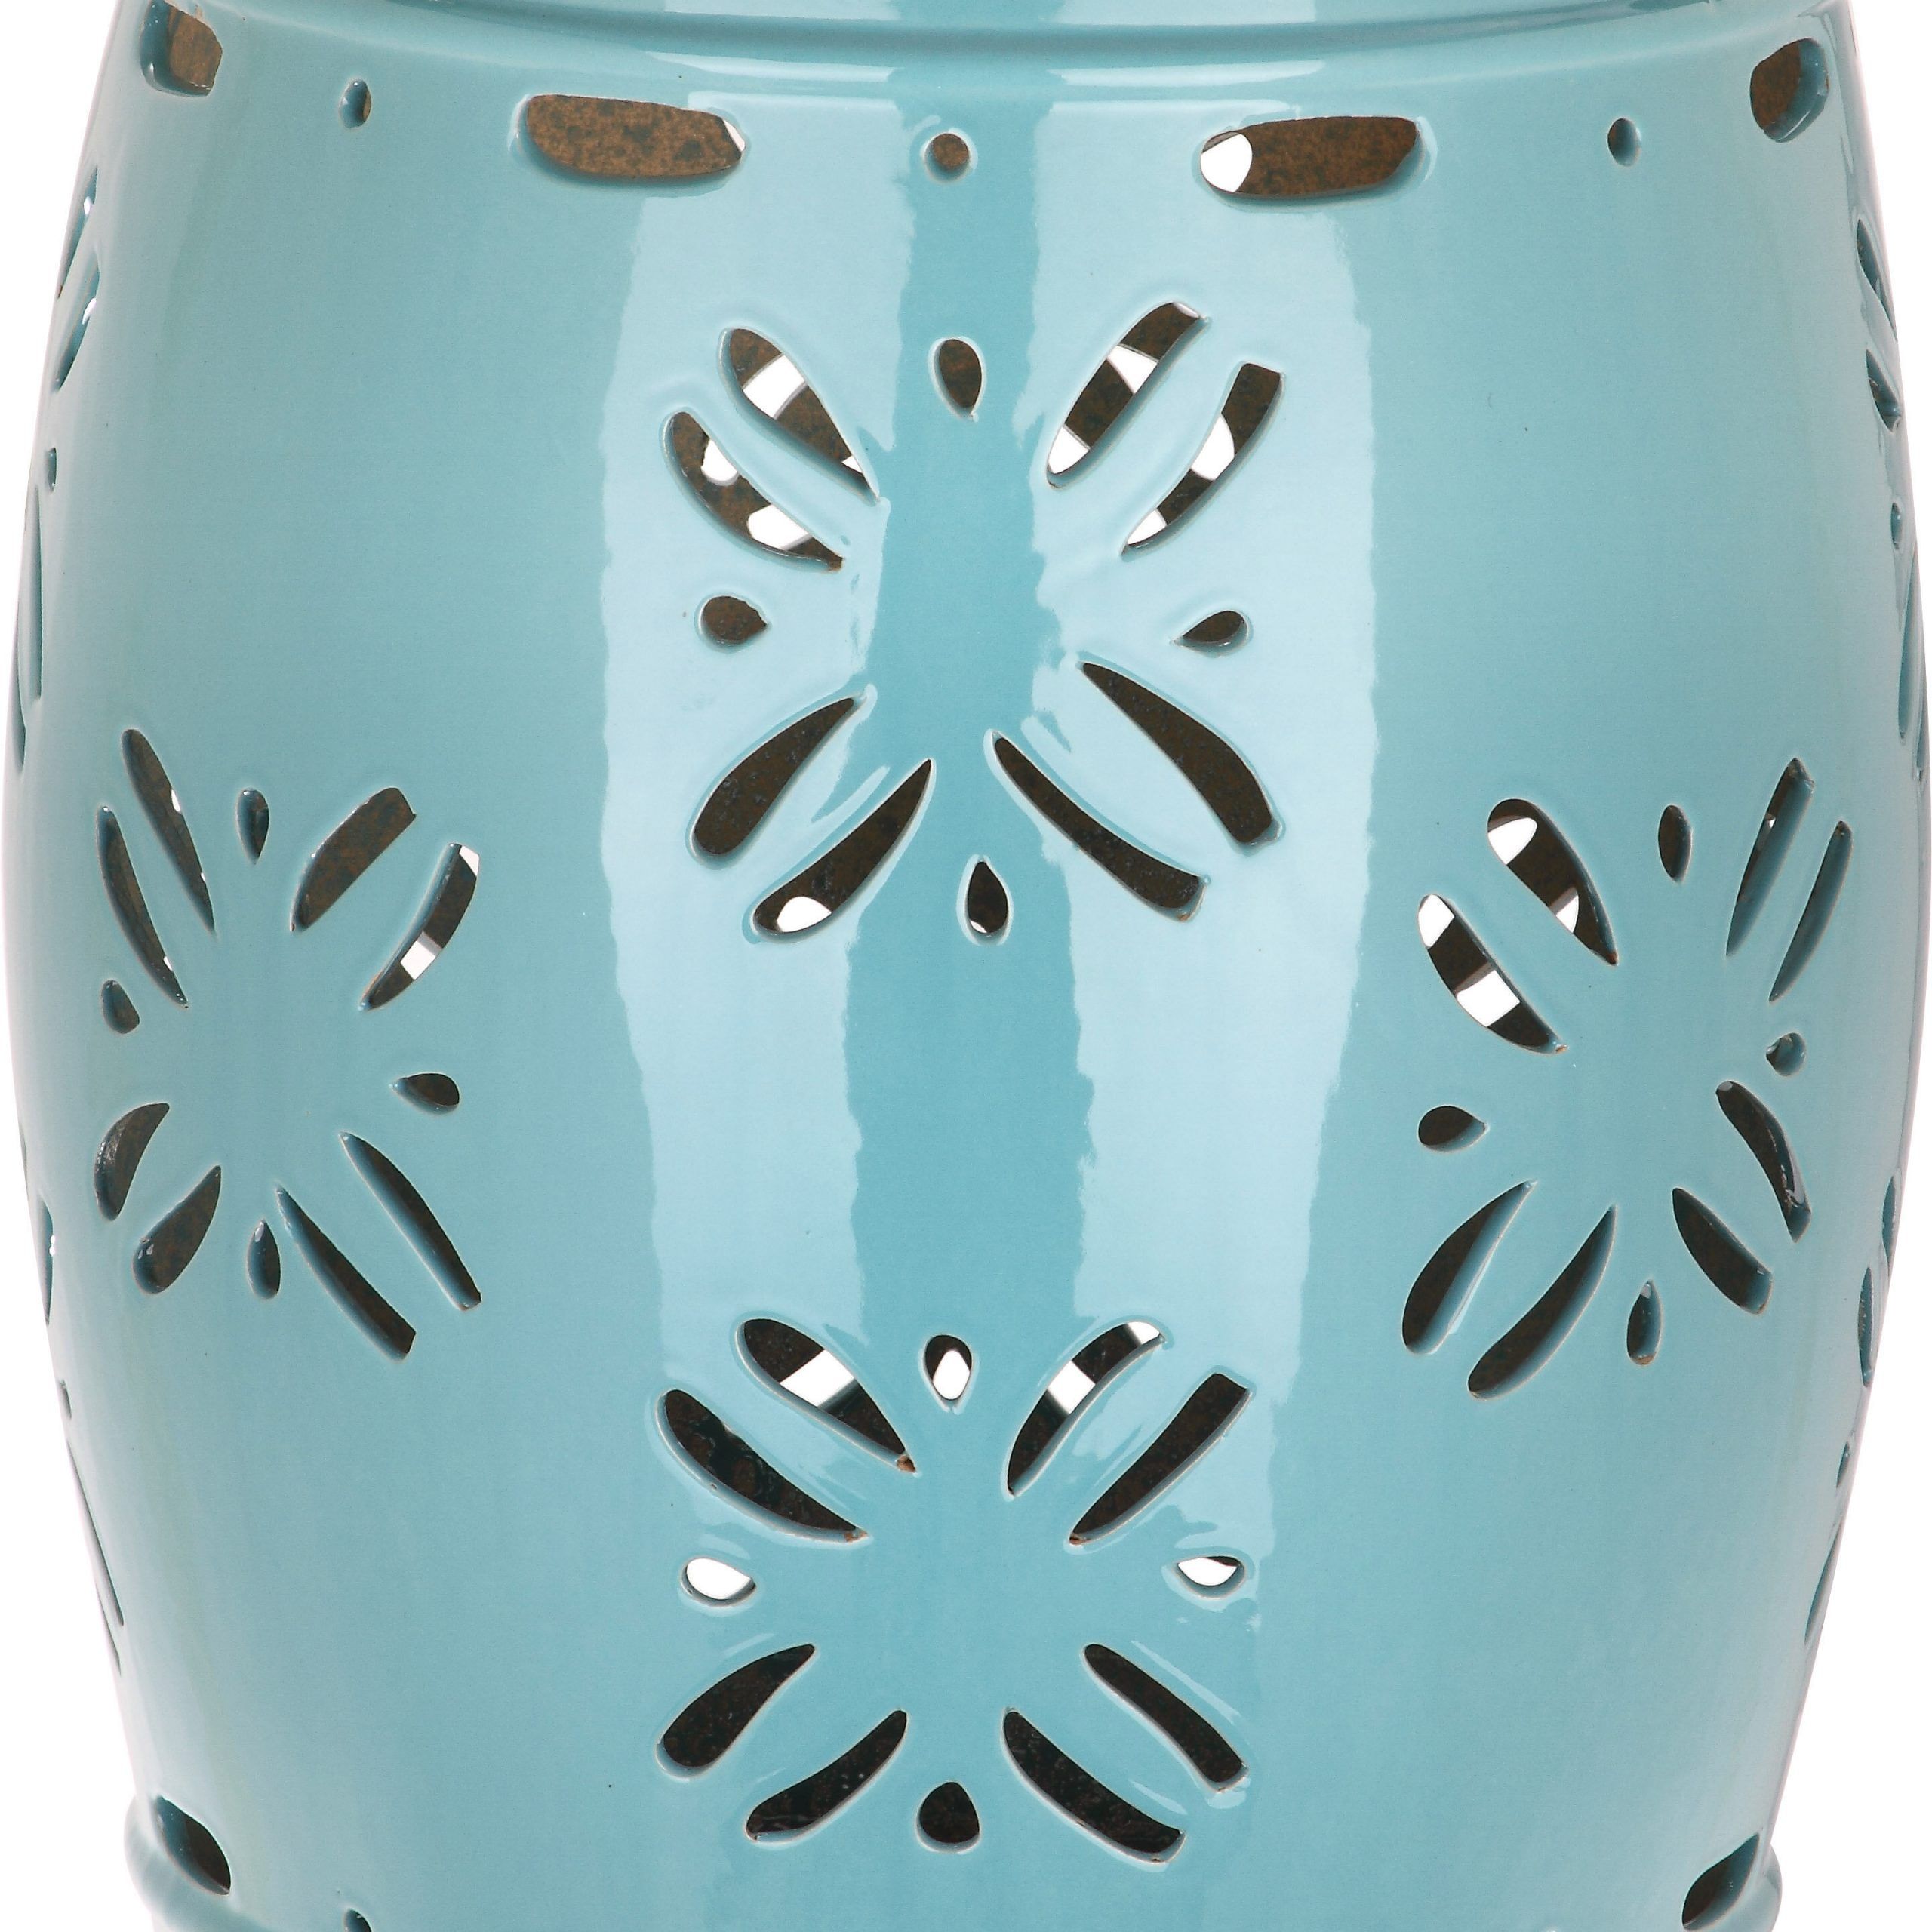 Ceramic Garden Accent Stools You'Ll Love In 2020 | Wayfair Throughout Lavin Ceramic Garden Stools (View 6 of 25)